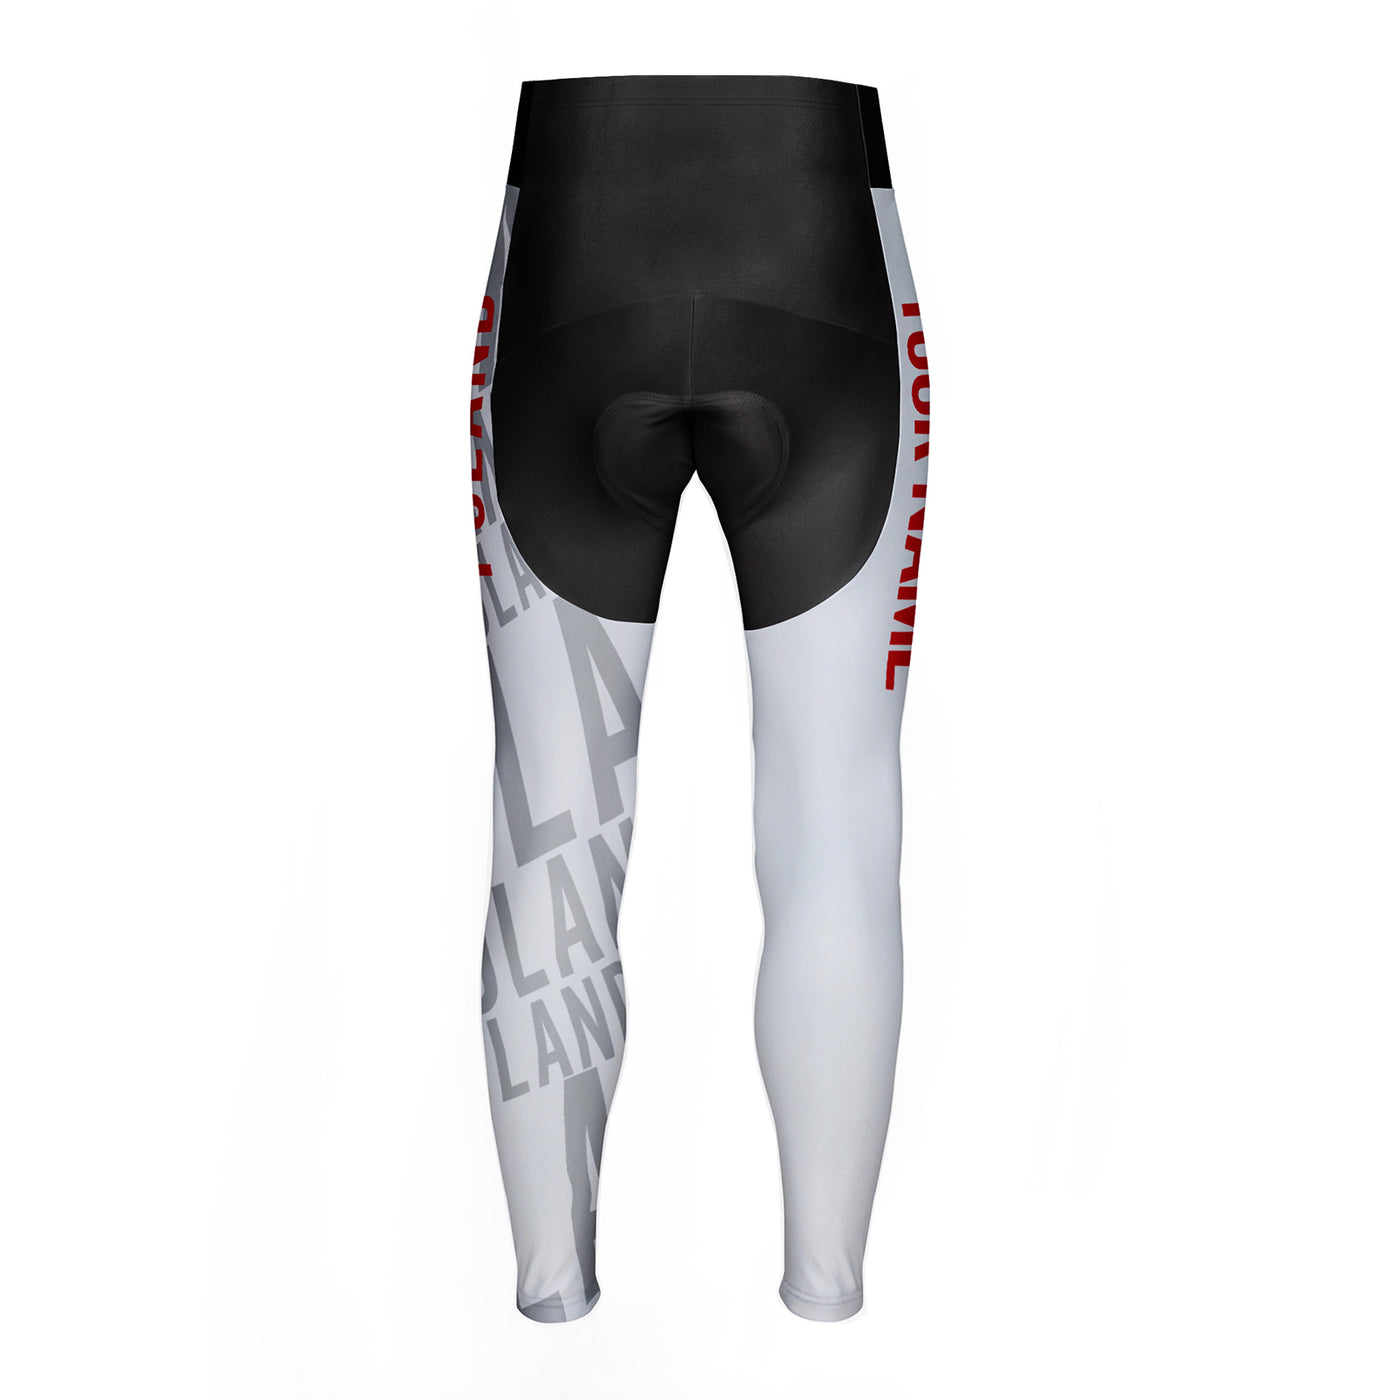 Customized Poland Unisex Cycling Tights Long Pants